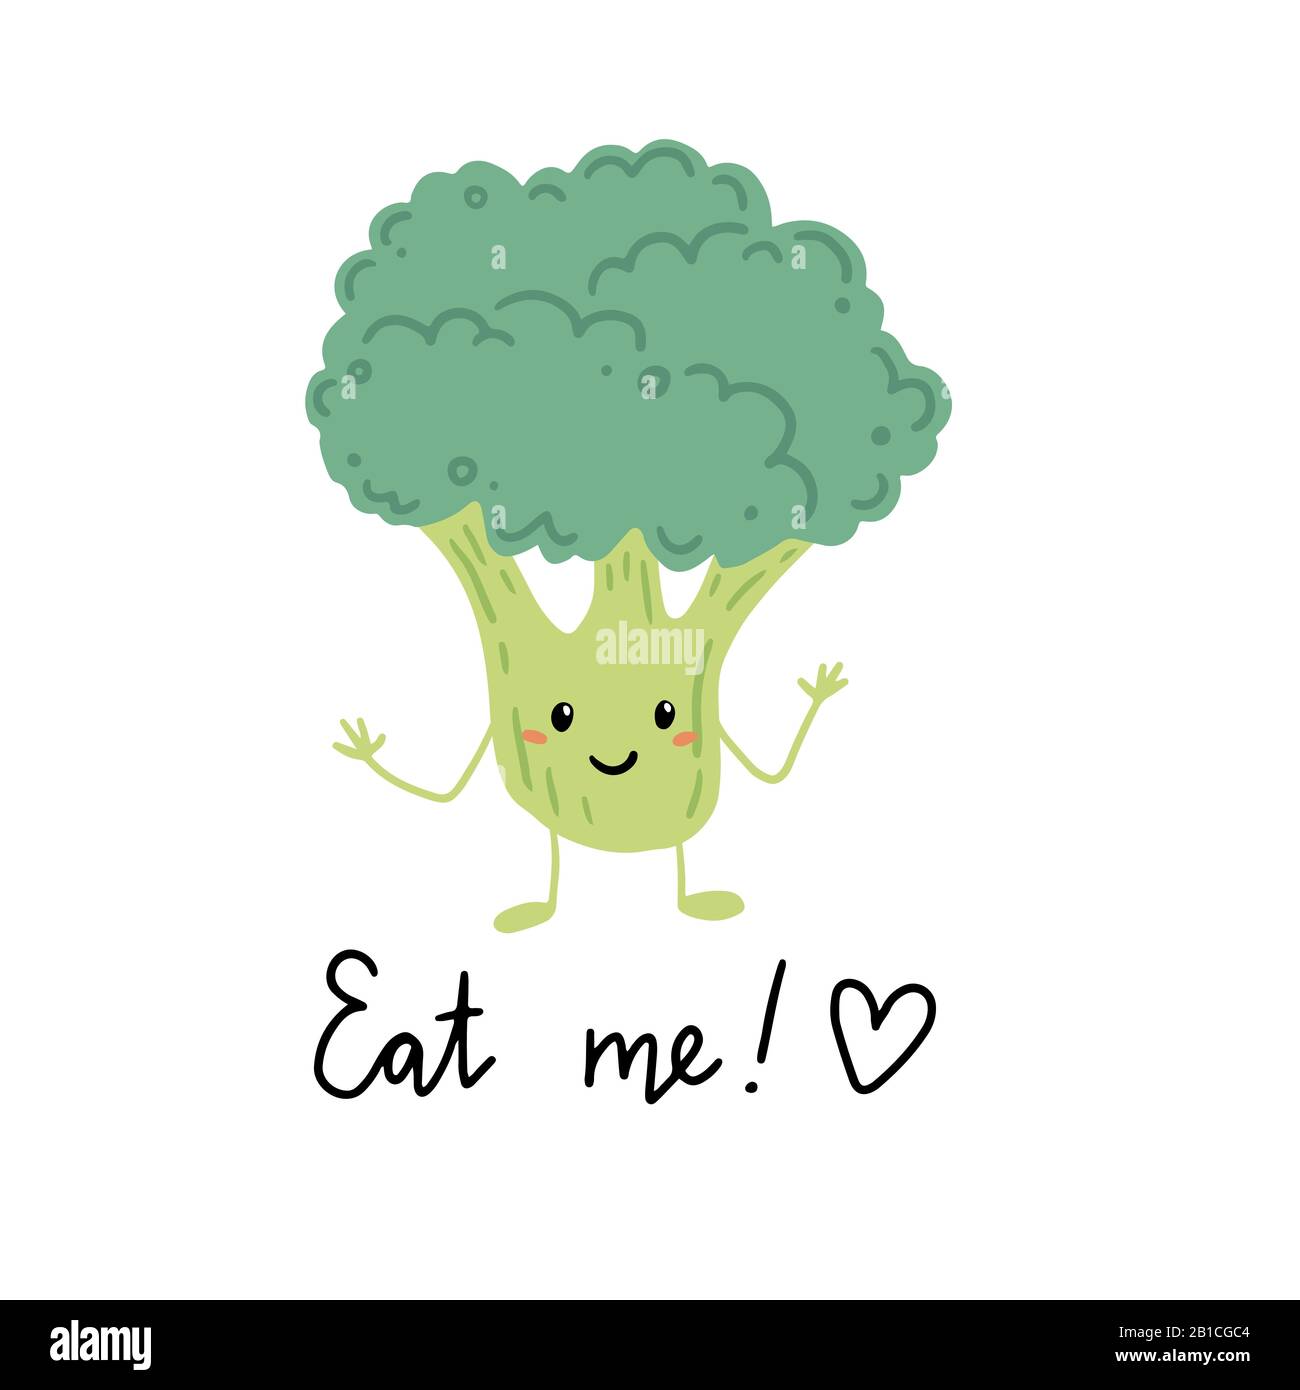 Broccoli funny cartoon character. Vector illustration isolated. Concept of healthy food, vegetarian. Broccoli have abstract, cartoon, hand drawn style. Stock Vector